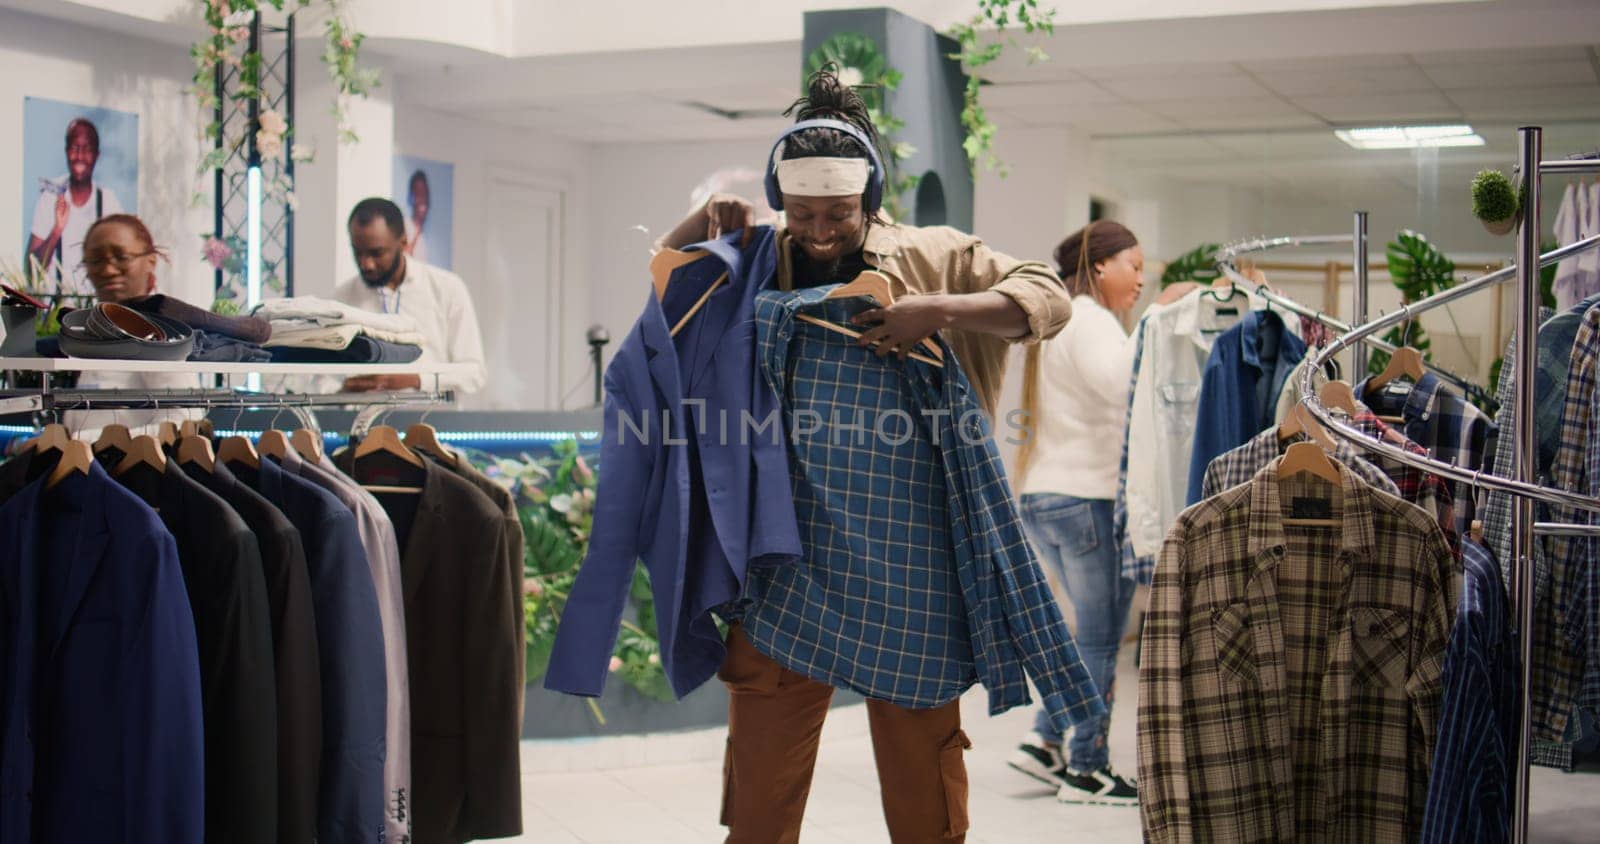 Man listening to music and dancing while looking at elegant clothes in clothing store, trying to determine if materials are qualitative. Client having fun fashion boutique while analyzing garments